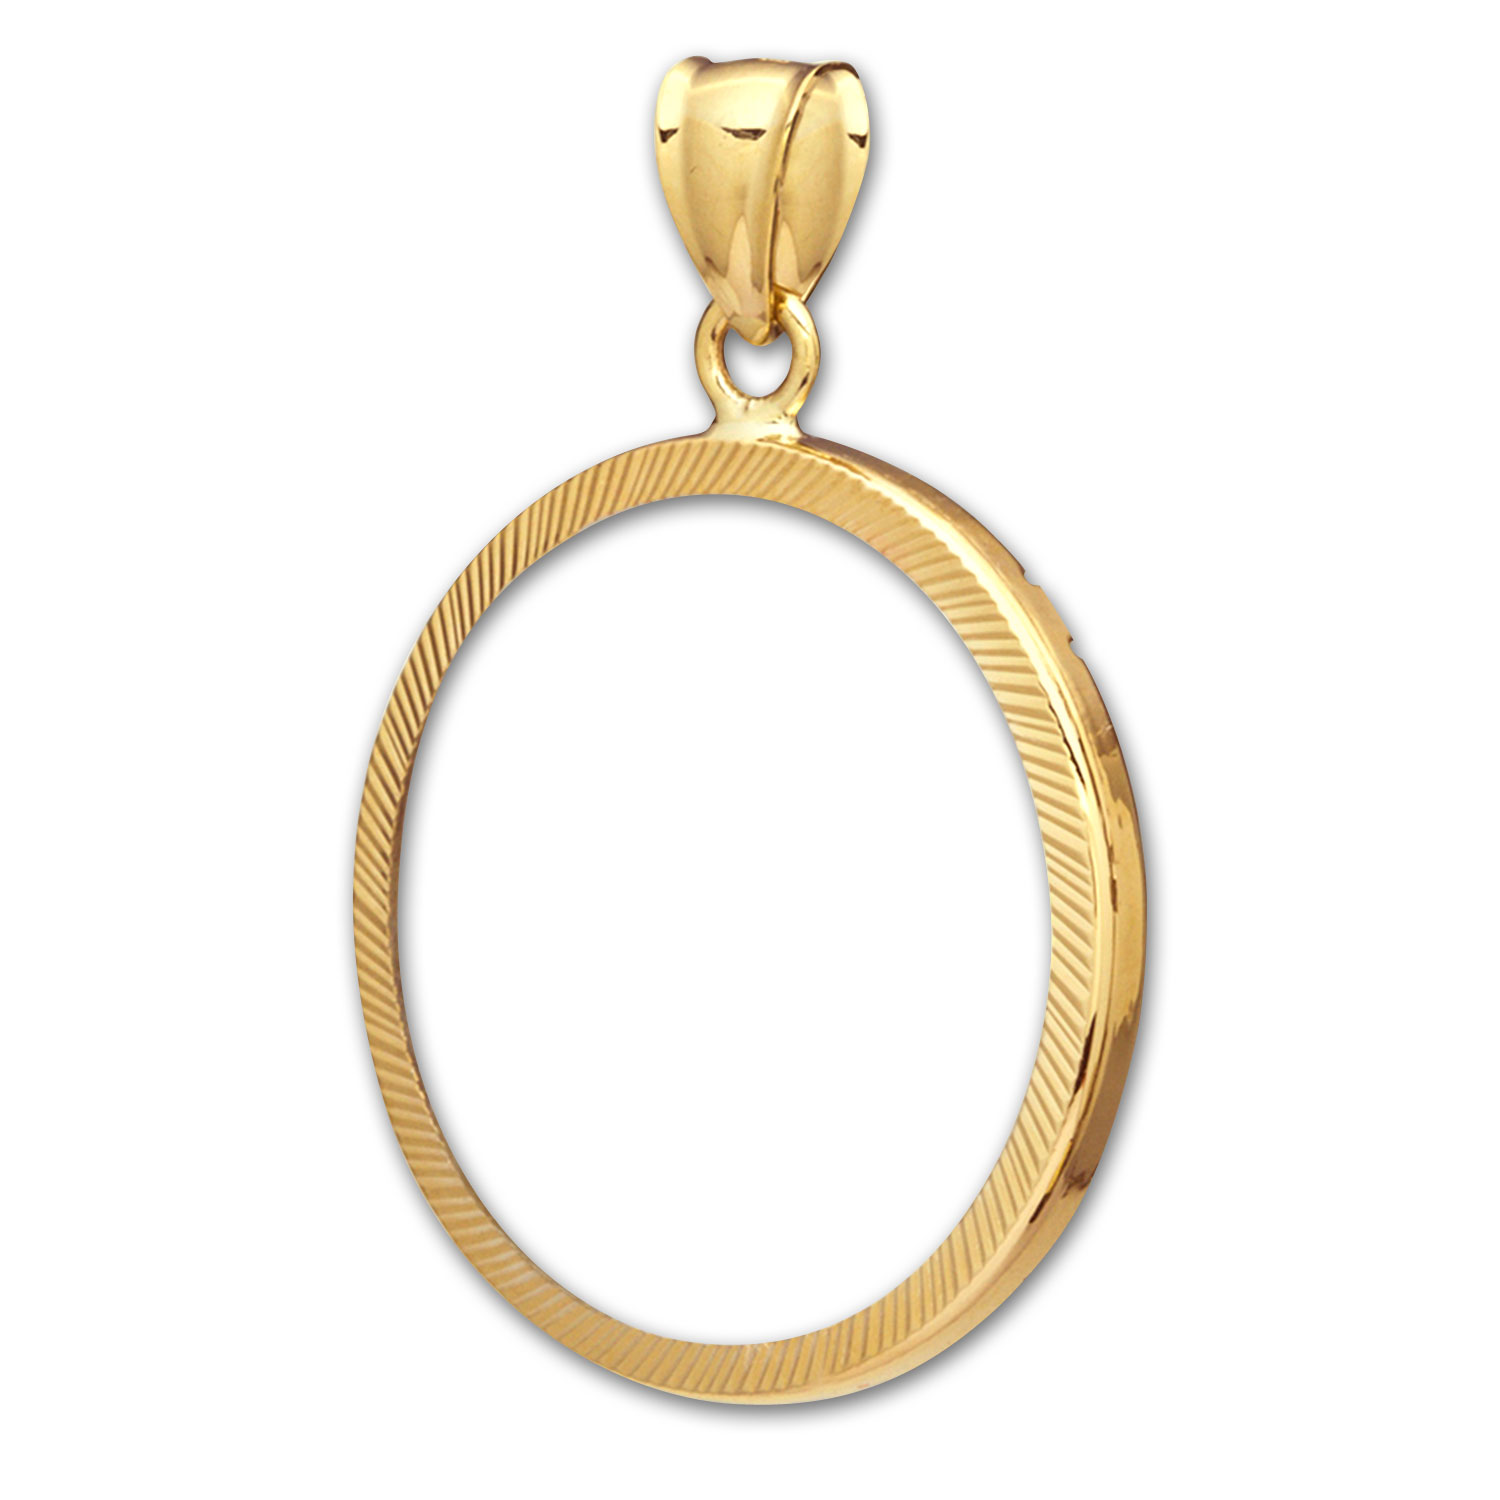 Buy 14K Gold Prong Diamond-Cut Coin Bezel - 22 millimeter - Click Image to Close